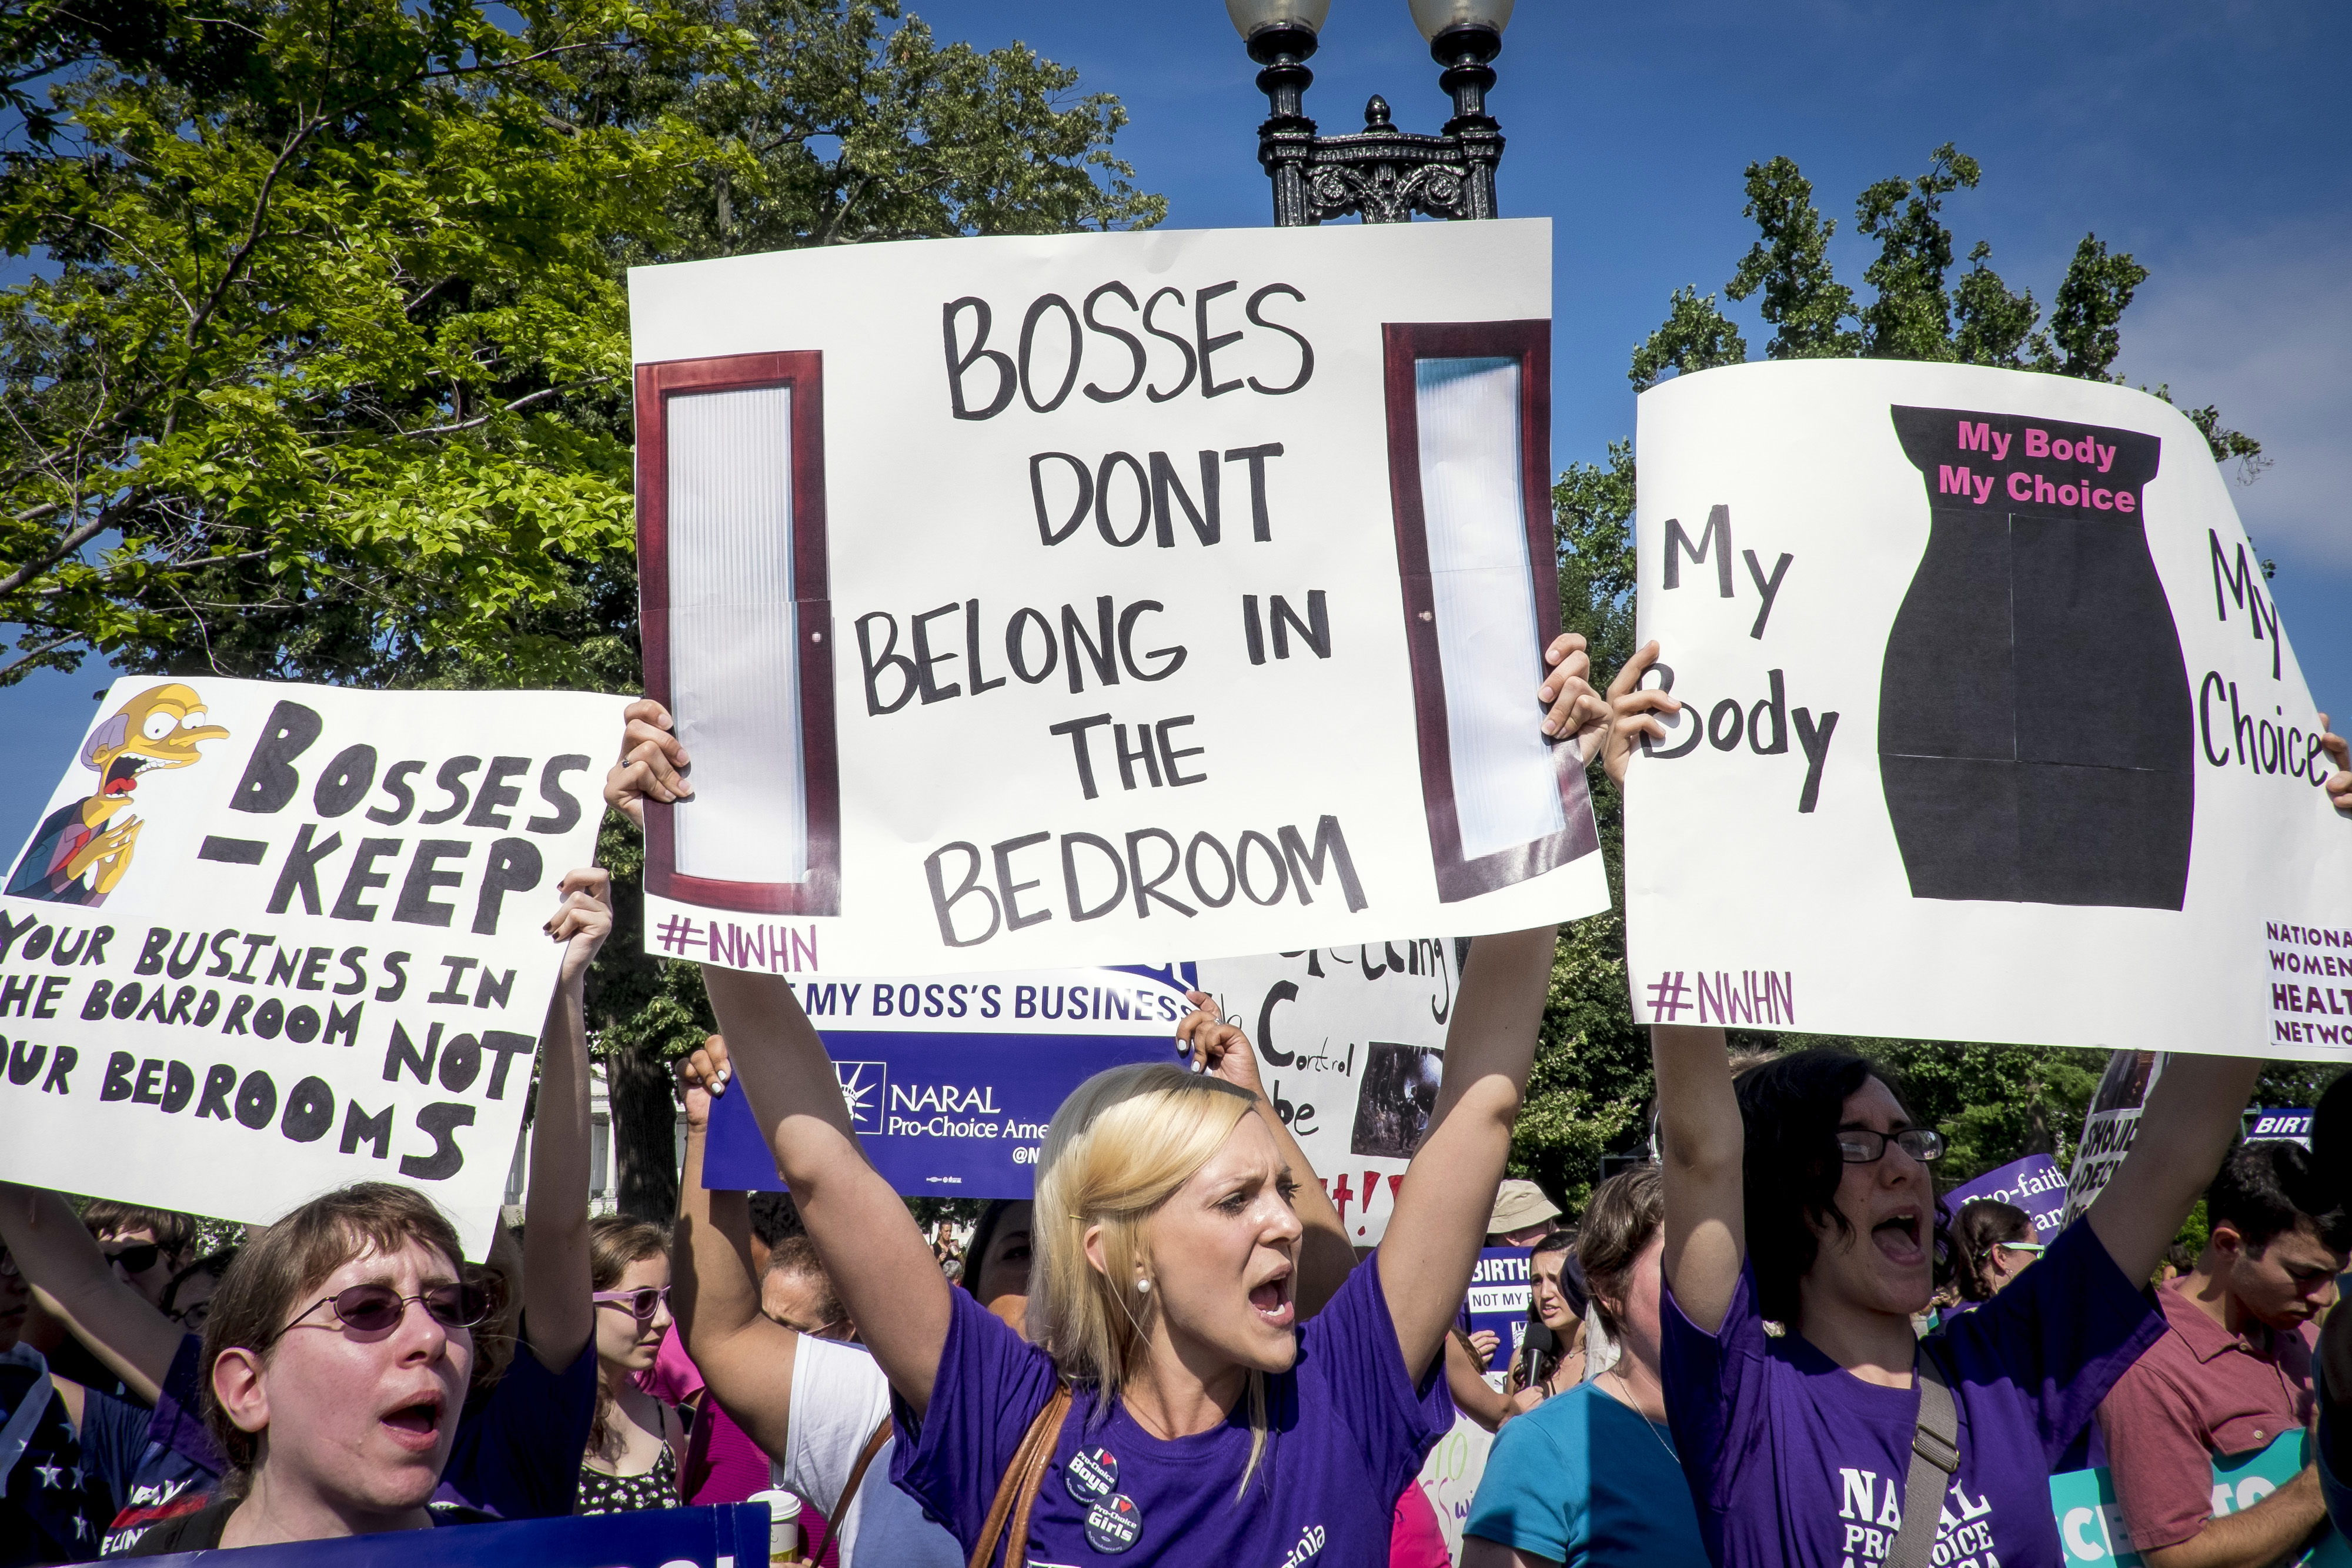 Activists who support the Affordable Care Act's employer contraceptive mandate demonstrate outside of the U.S. Supreme Court in Washington, D.C., U.S., on Monday, June 30, 2014. (Bloomberg—Bloomberg via Getty Images)